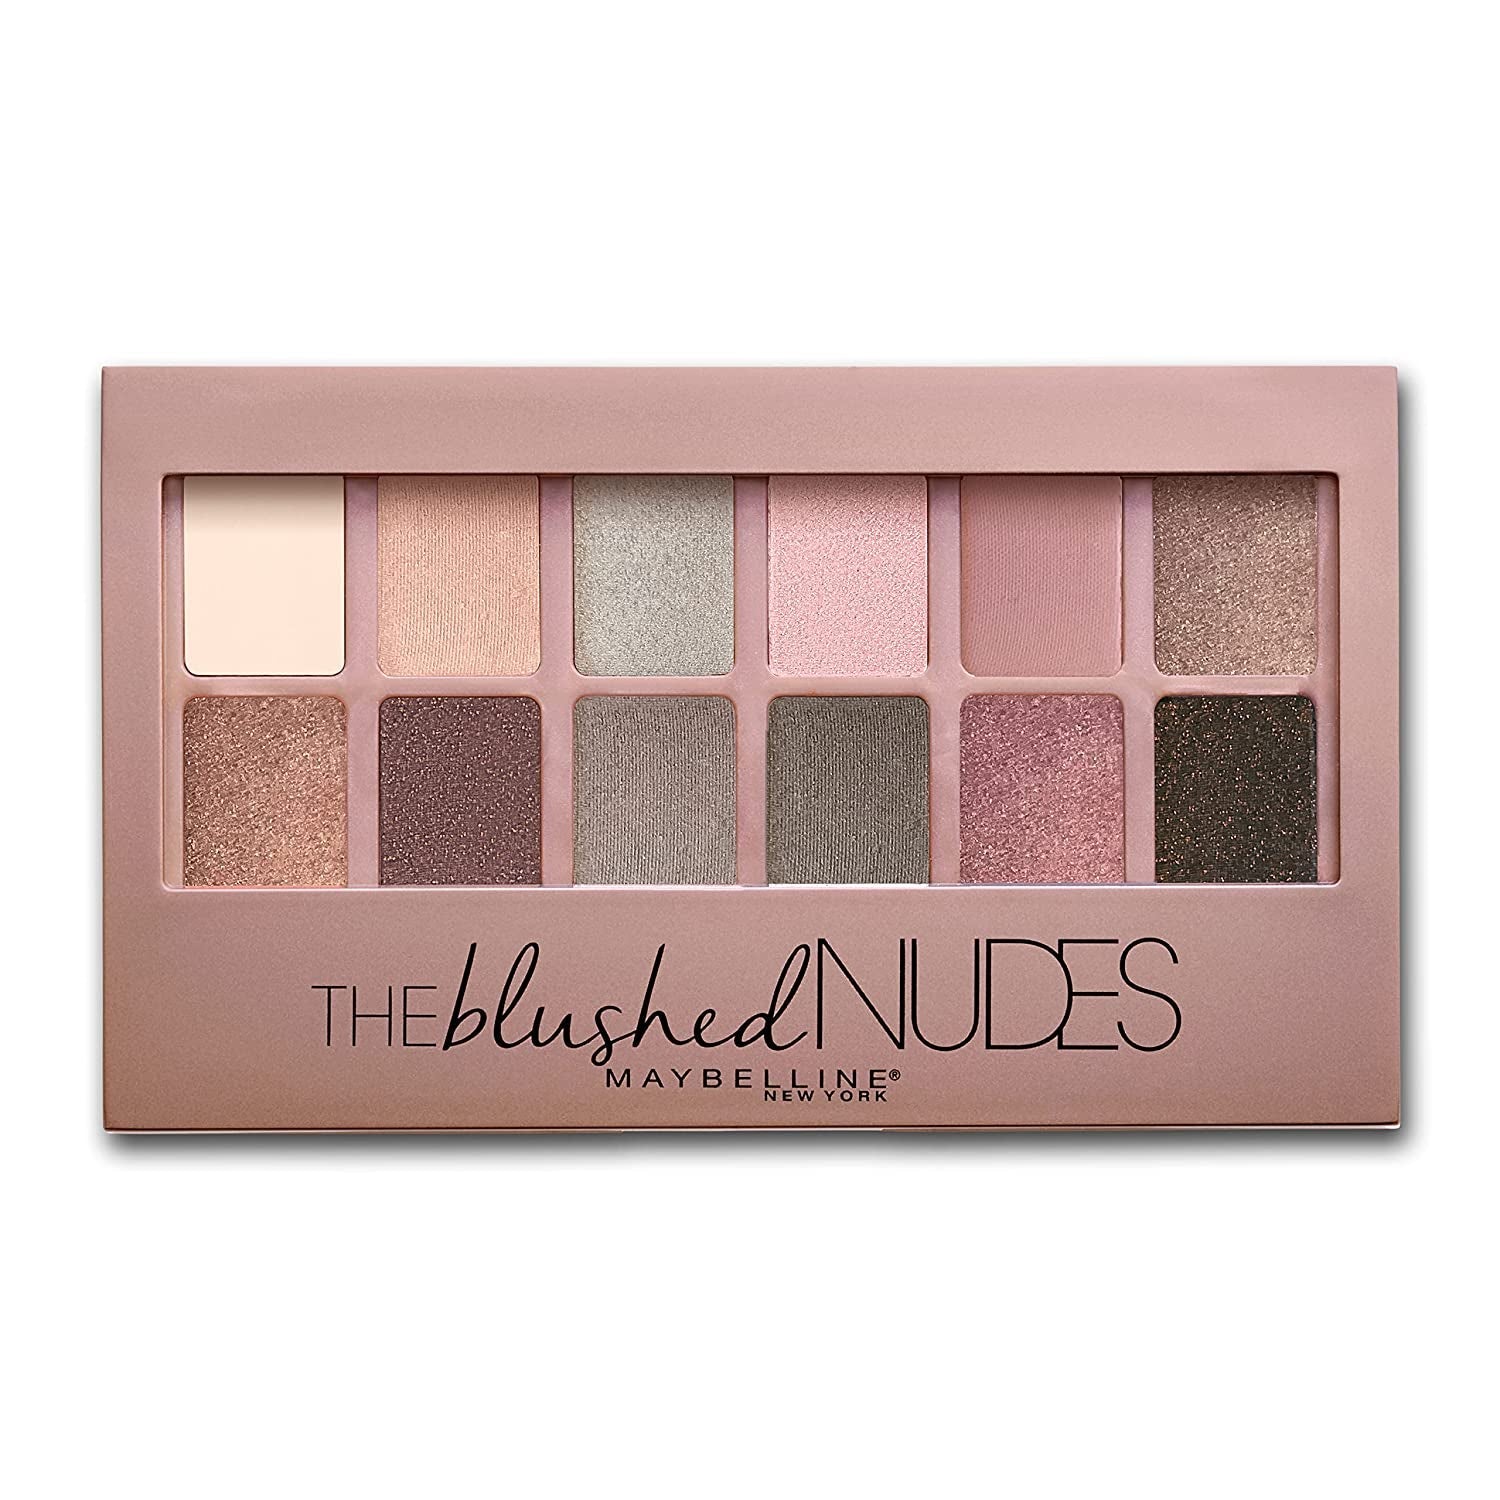 the Blushed Nudes Eyeshadow Palette Makeup, 12 Pigmented Matte & Shimmer Shades, Blendable Powder, 1 Count